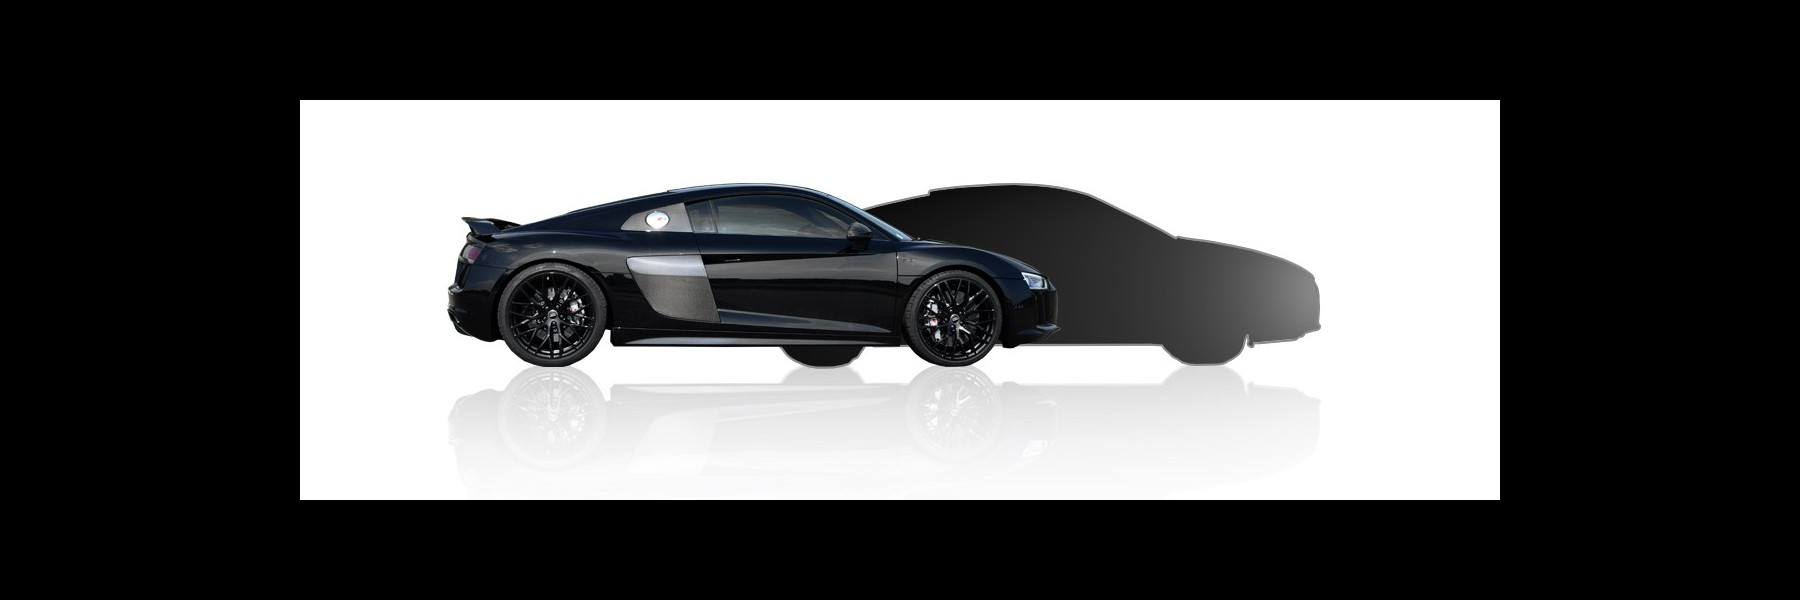 Combo Audi R8 V10 plus + car of your choice